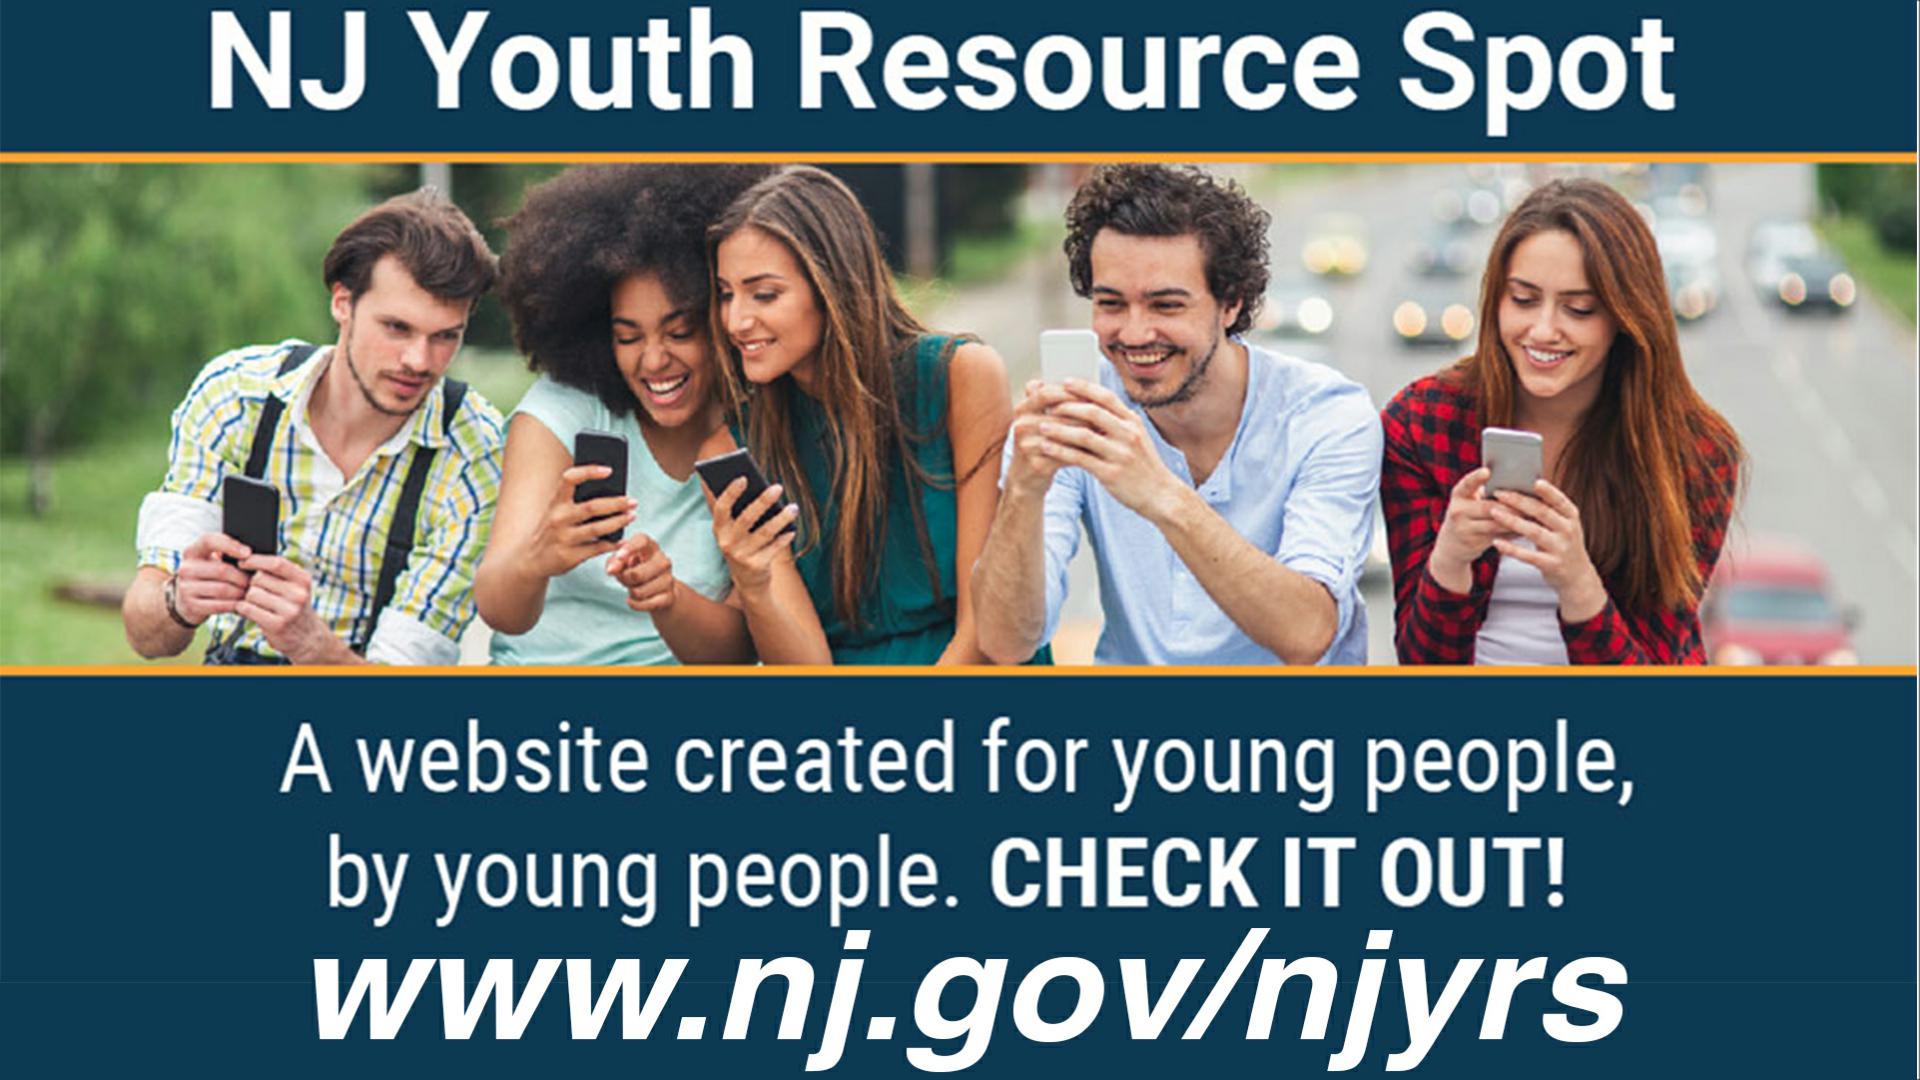 NJ Youth Resources Spot